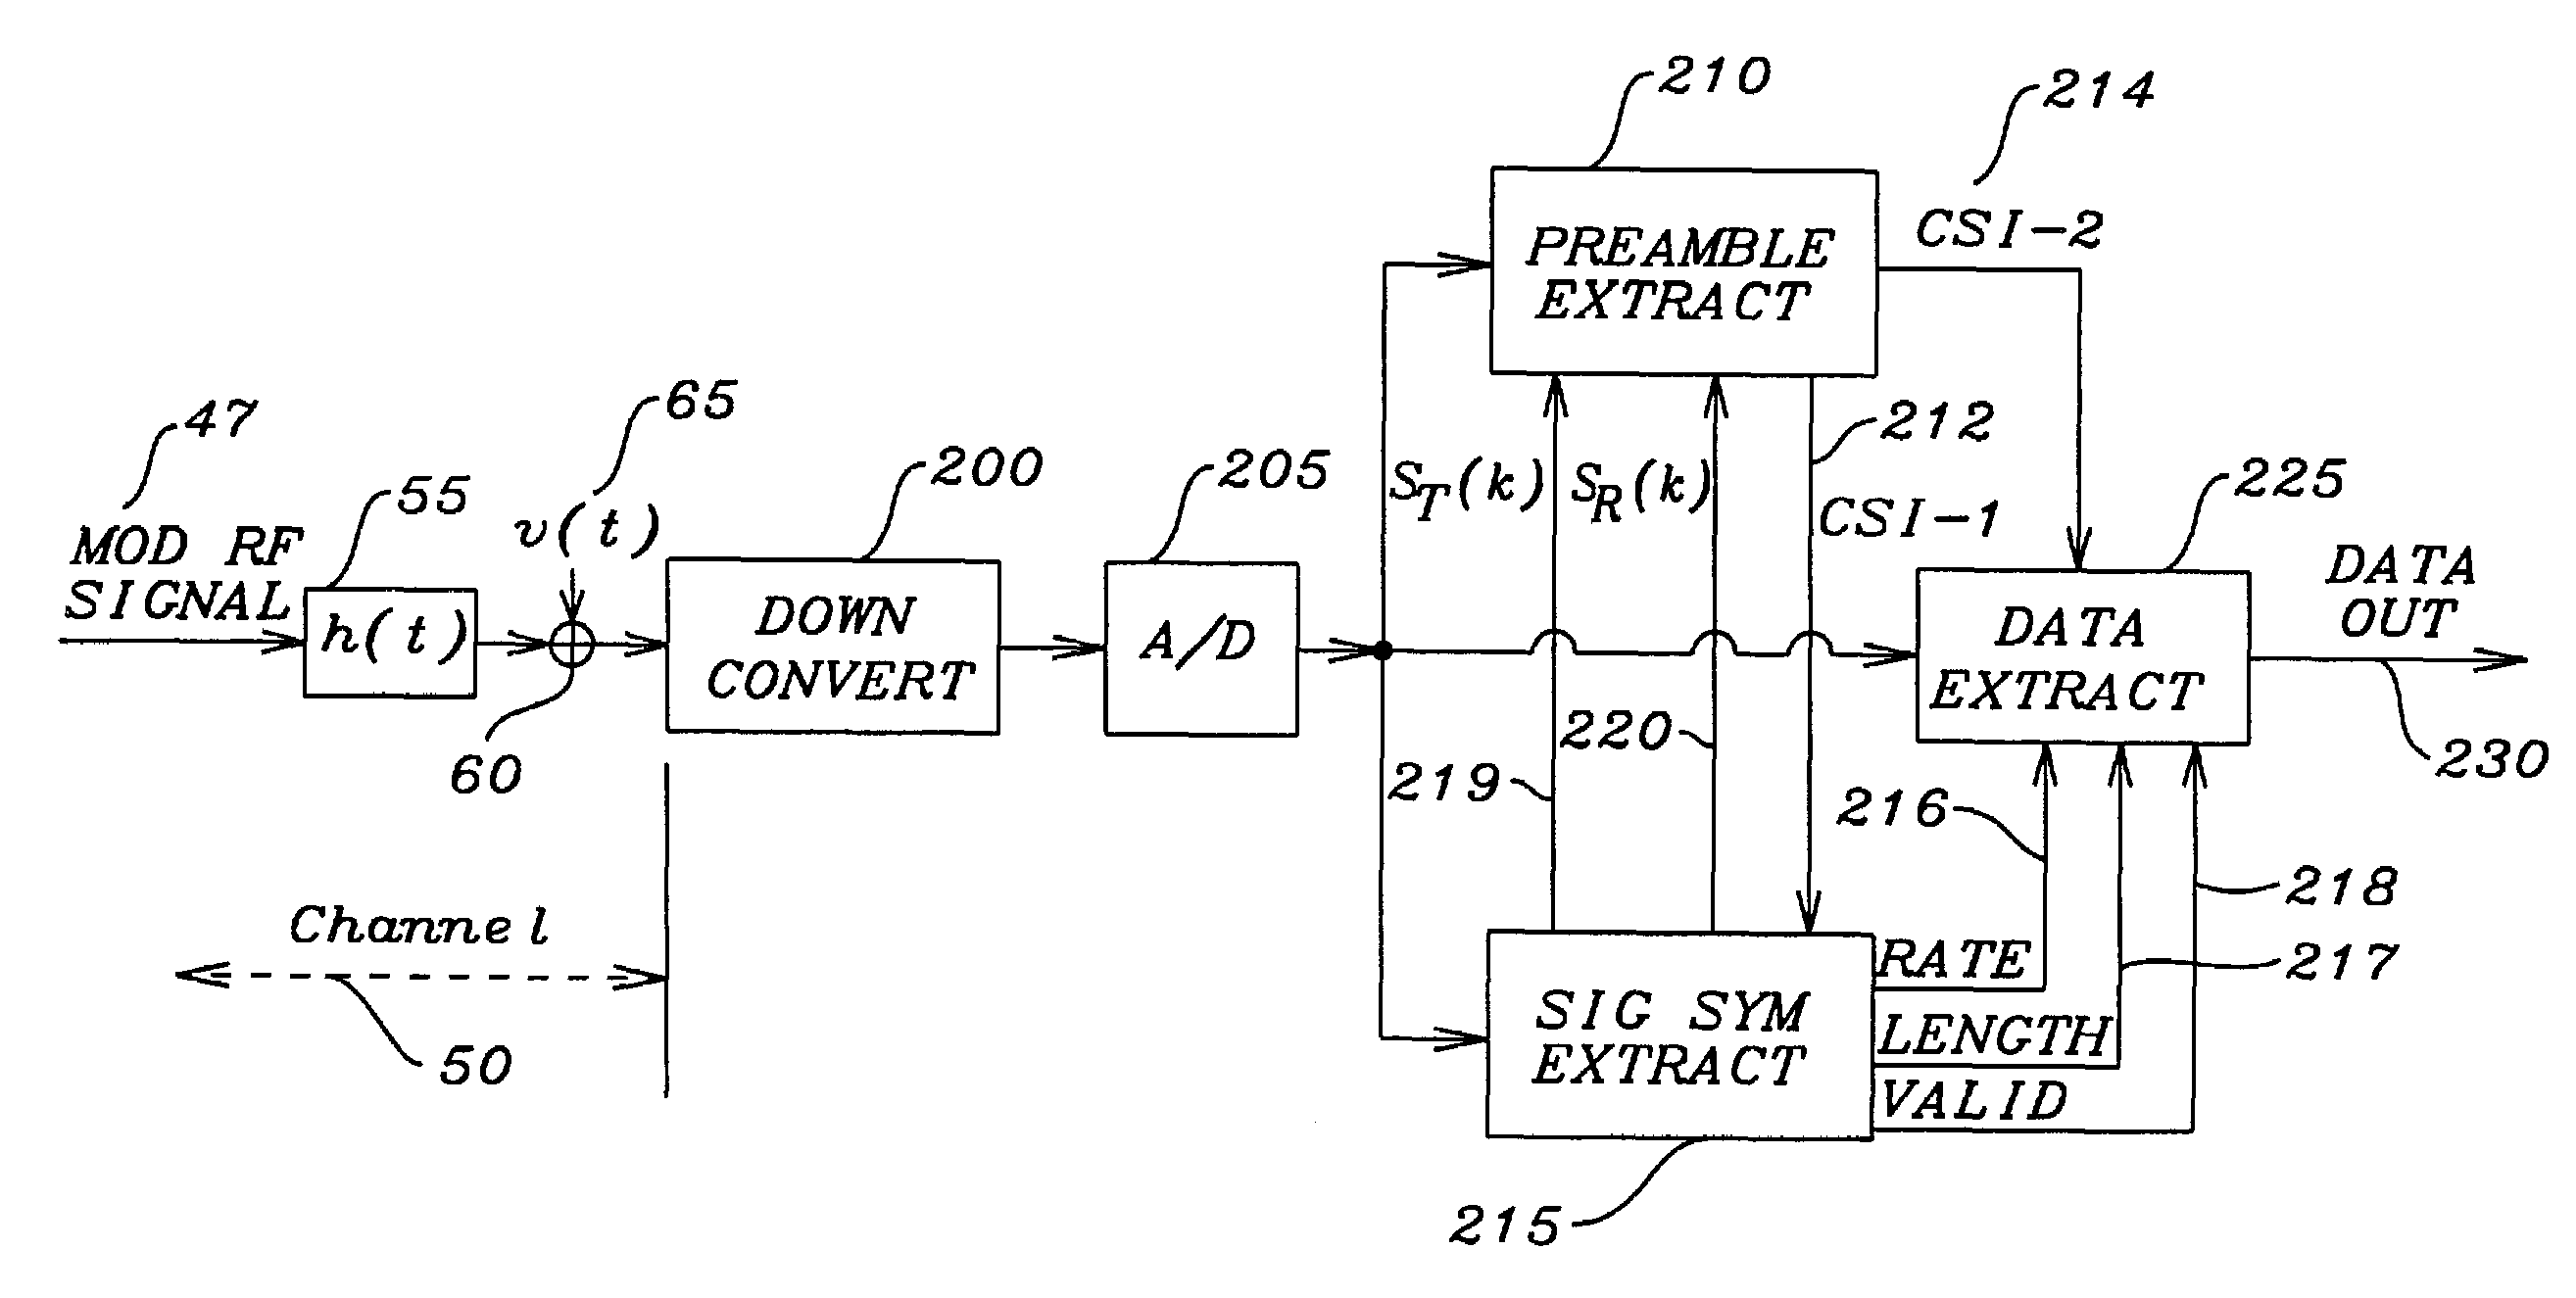 Method for reducing channel estimation error in an OFDM system